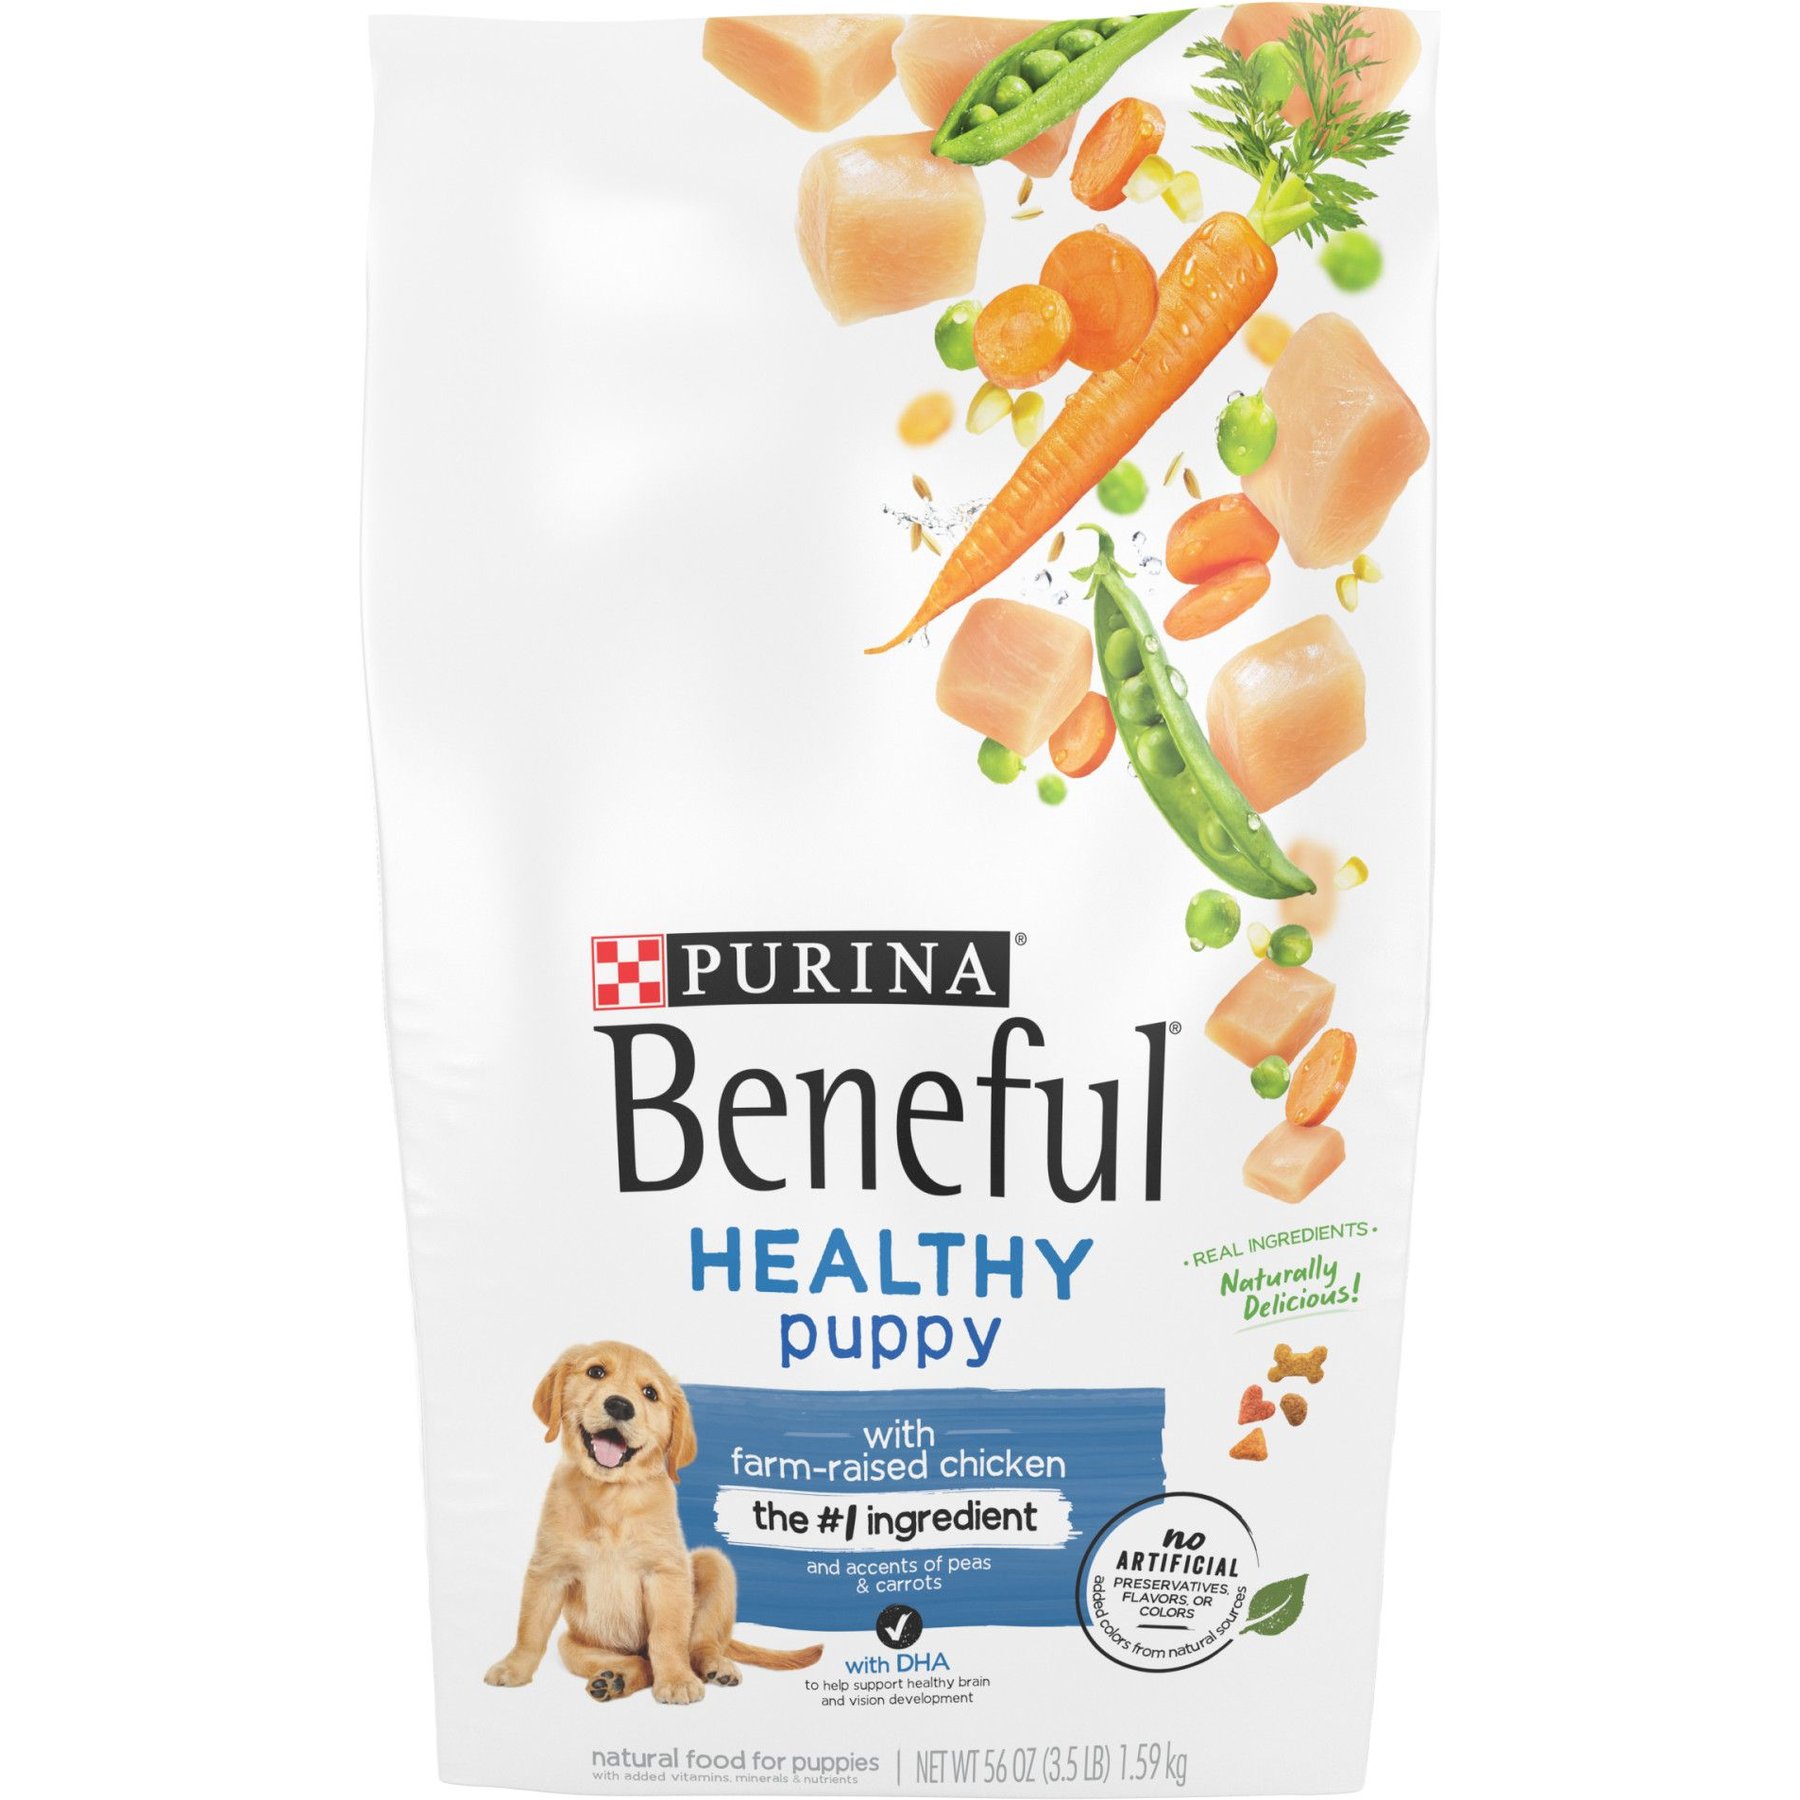 Purina Beneful Healthy Puppy With Farm